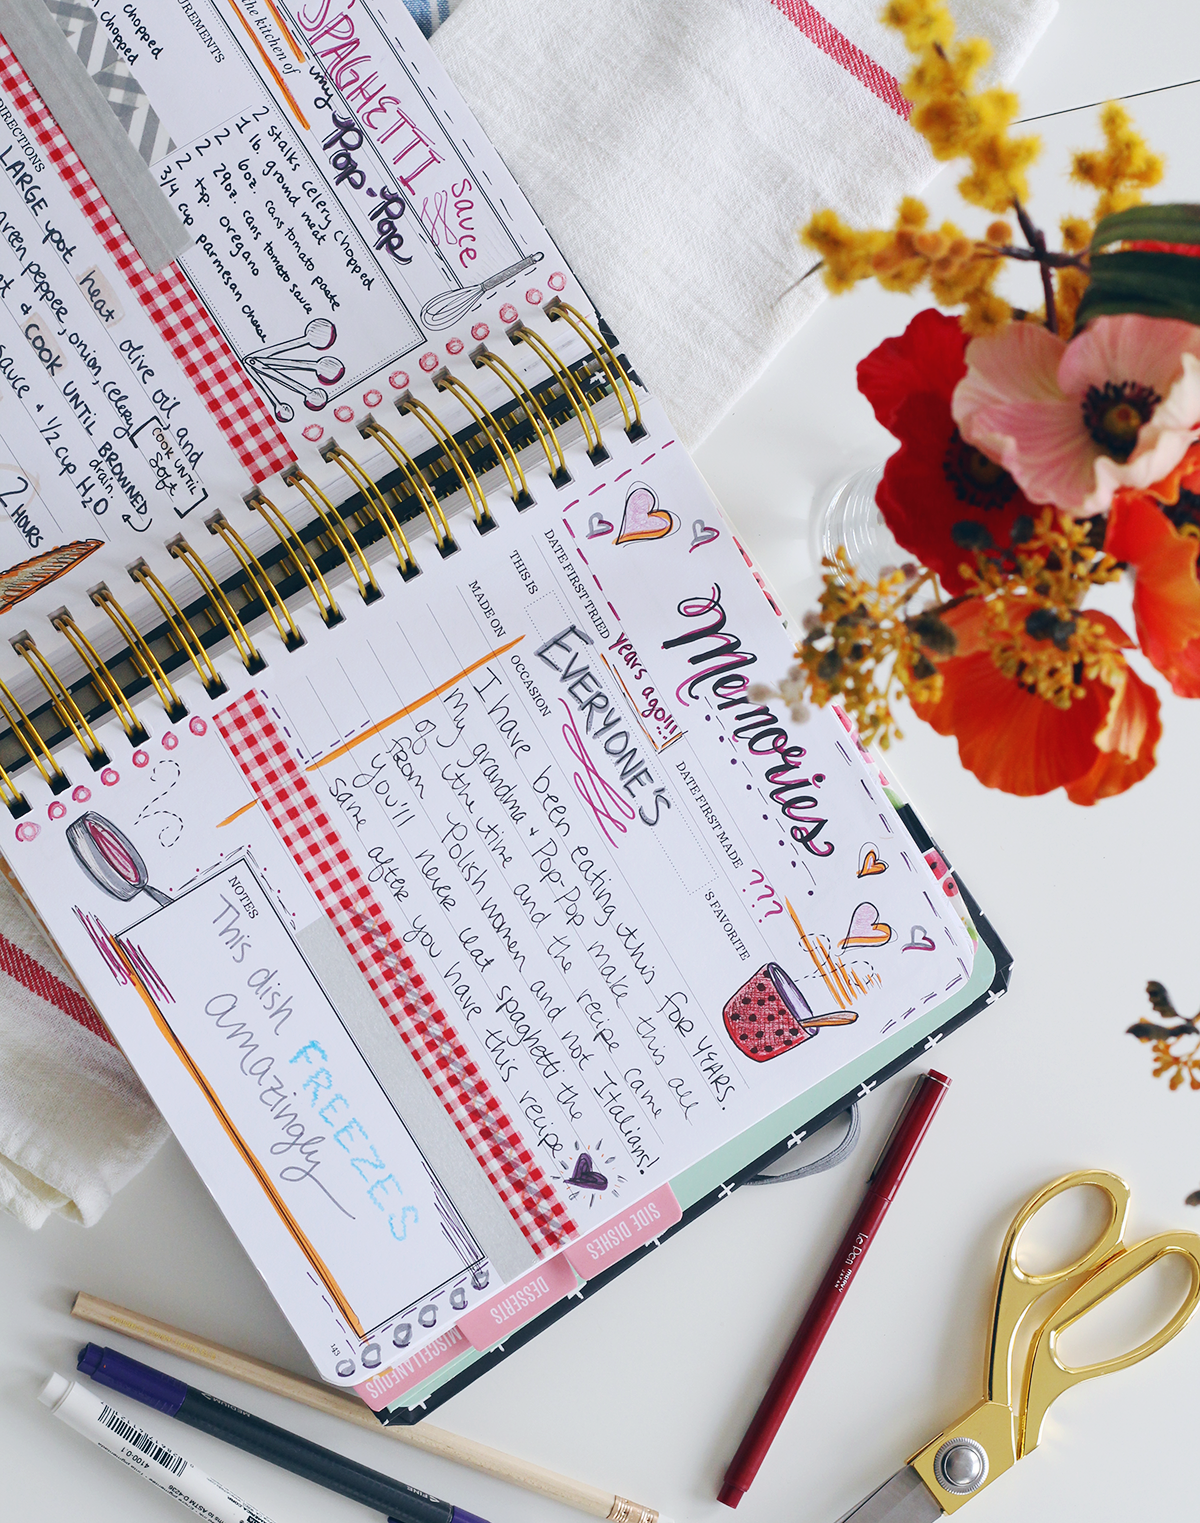 Use scrapbooking and planner supplies to add recipes and memories to the pages of your Keepsake Kitchen Diary